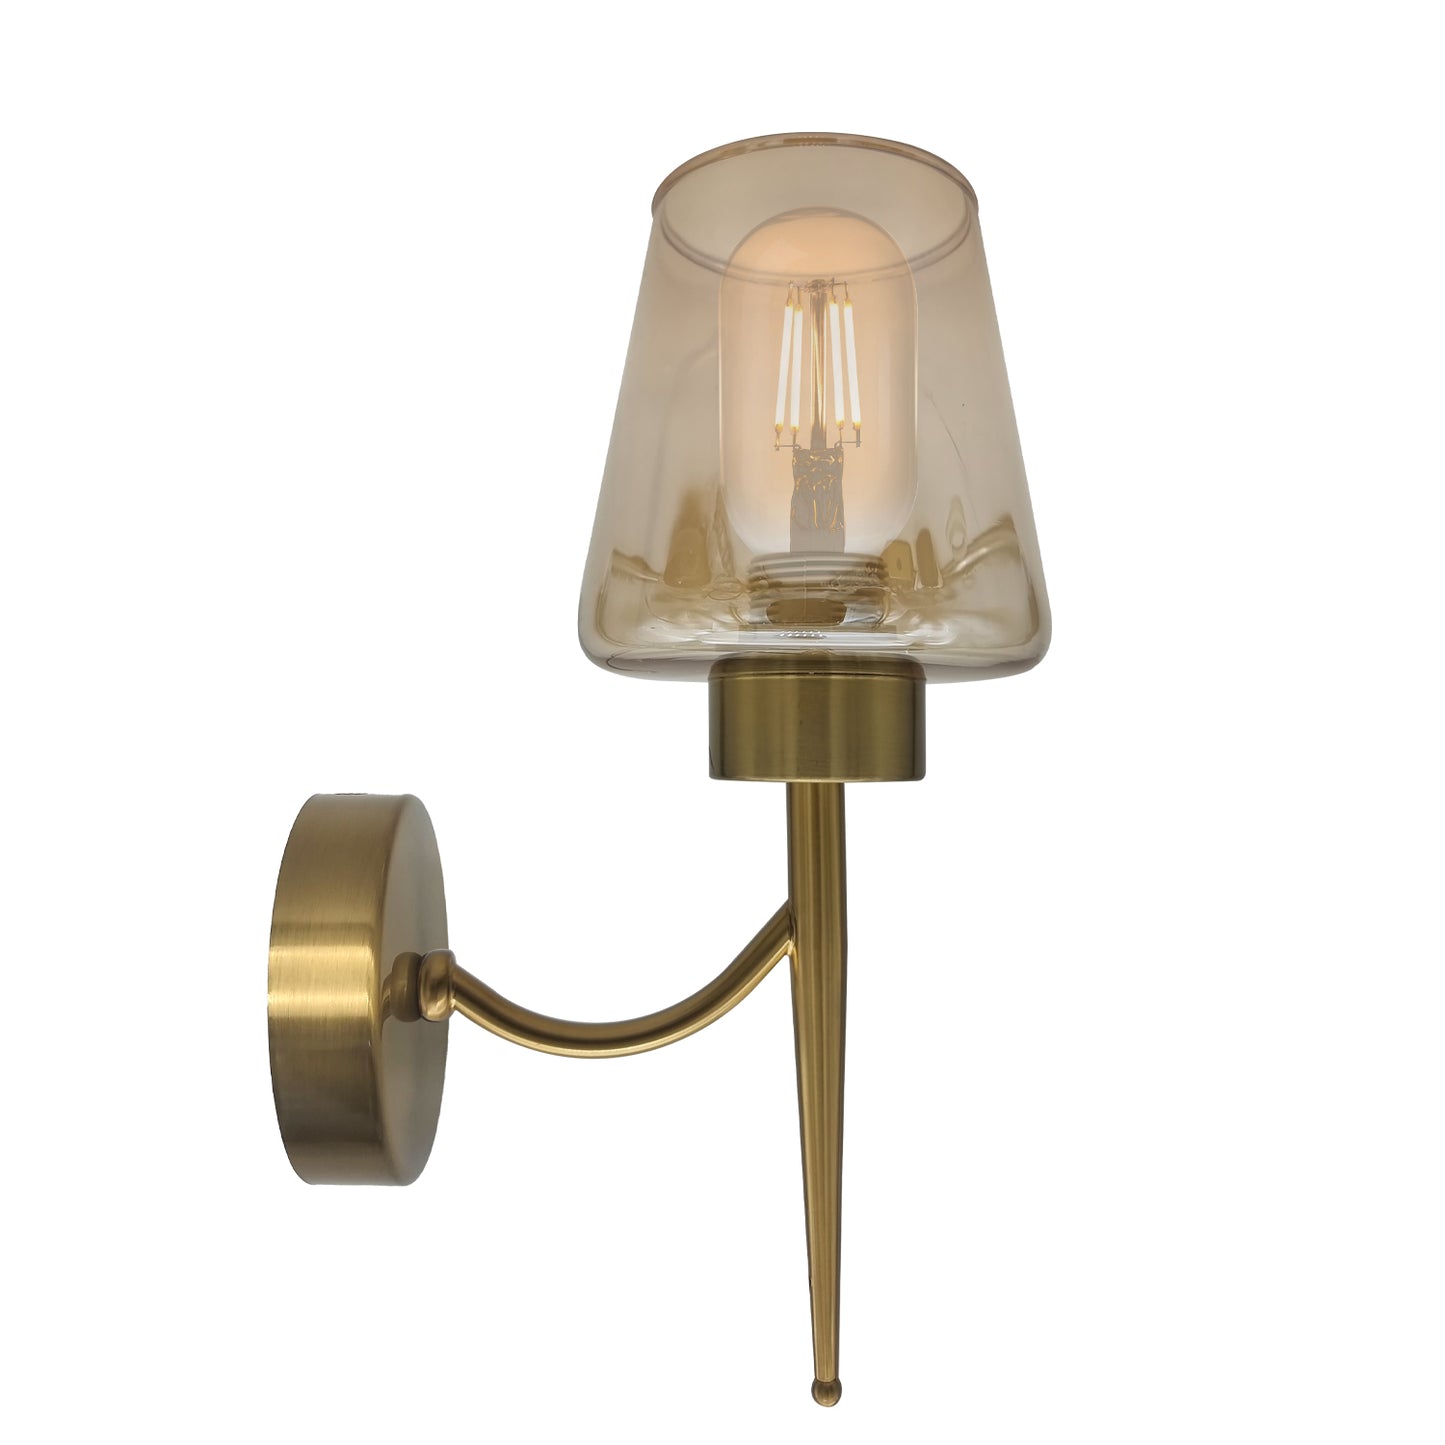 Modern Amber Glass Plate Wall Light with Bell/Mug Shape Lampshade – Ideal for Bedrooms, Hallways, Lounge, Kitchens, and Chic Bar Spaces